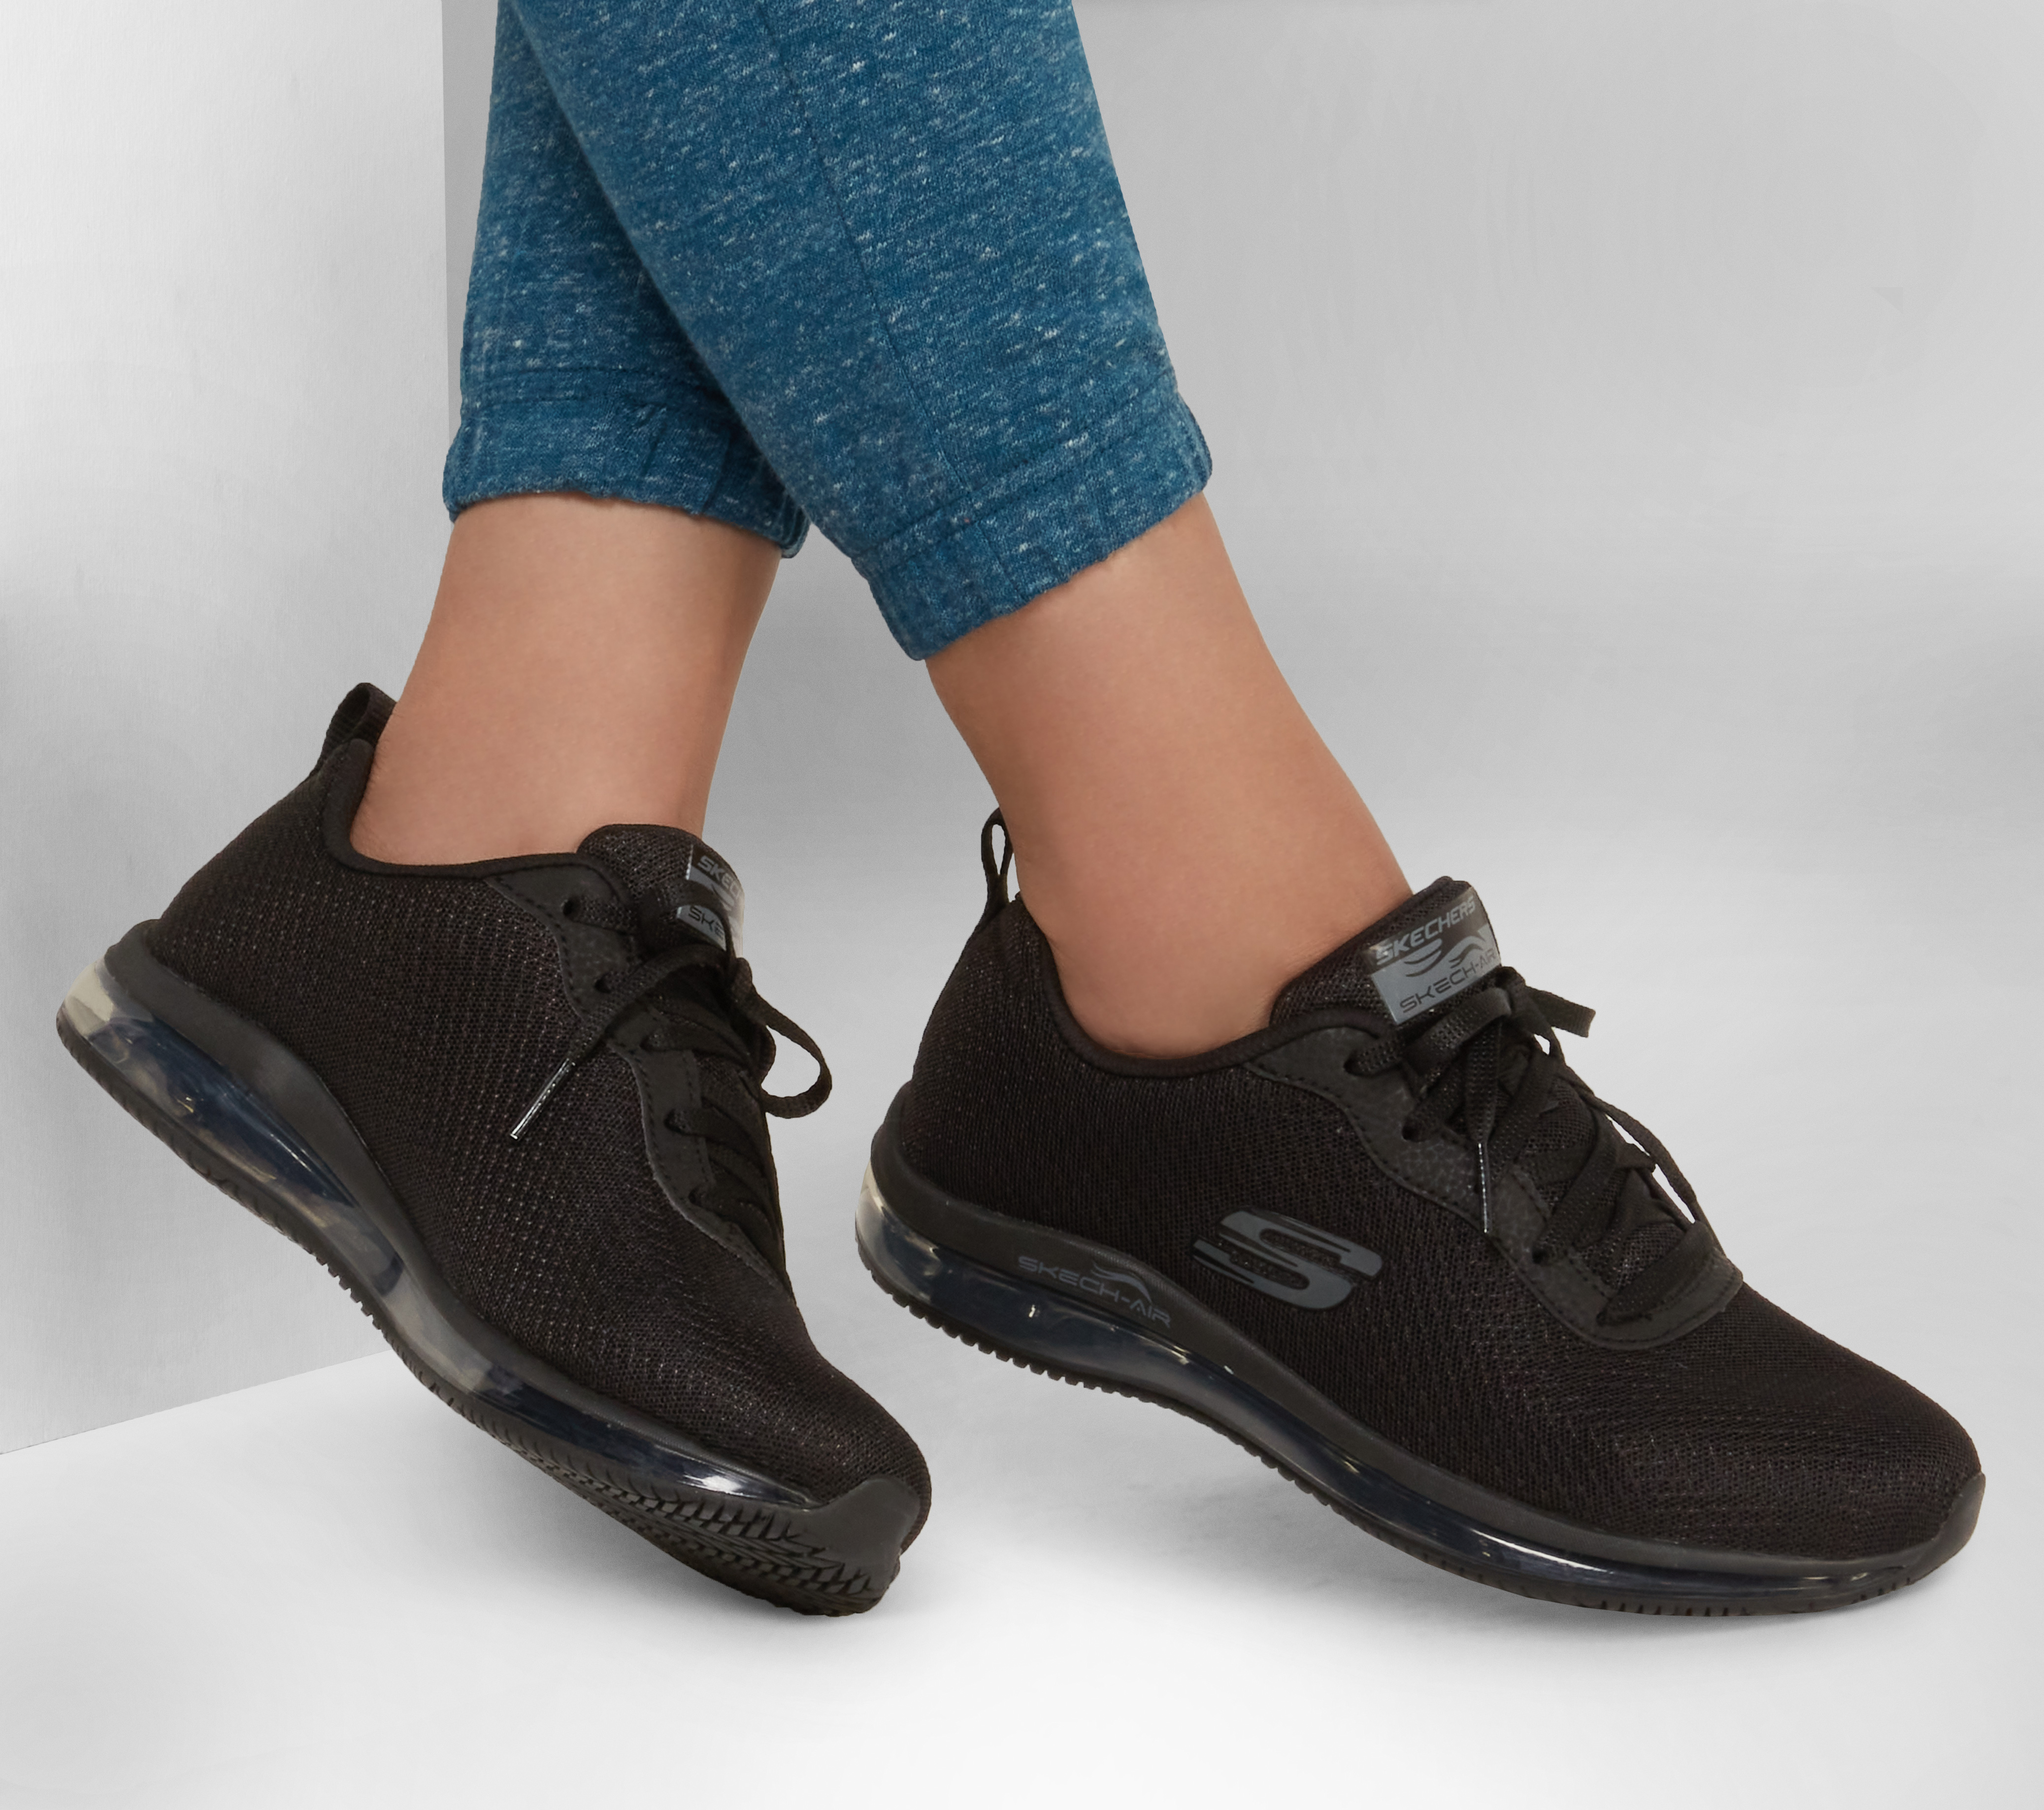 Relaxed | SKECHERS Work Fit: Skech-Air SR